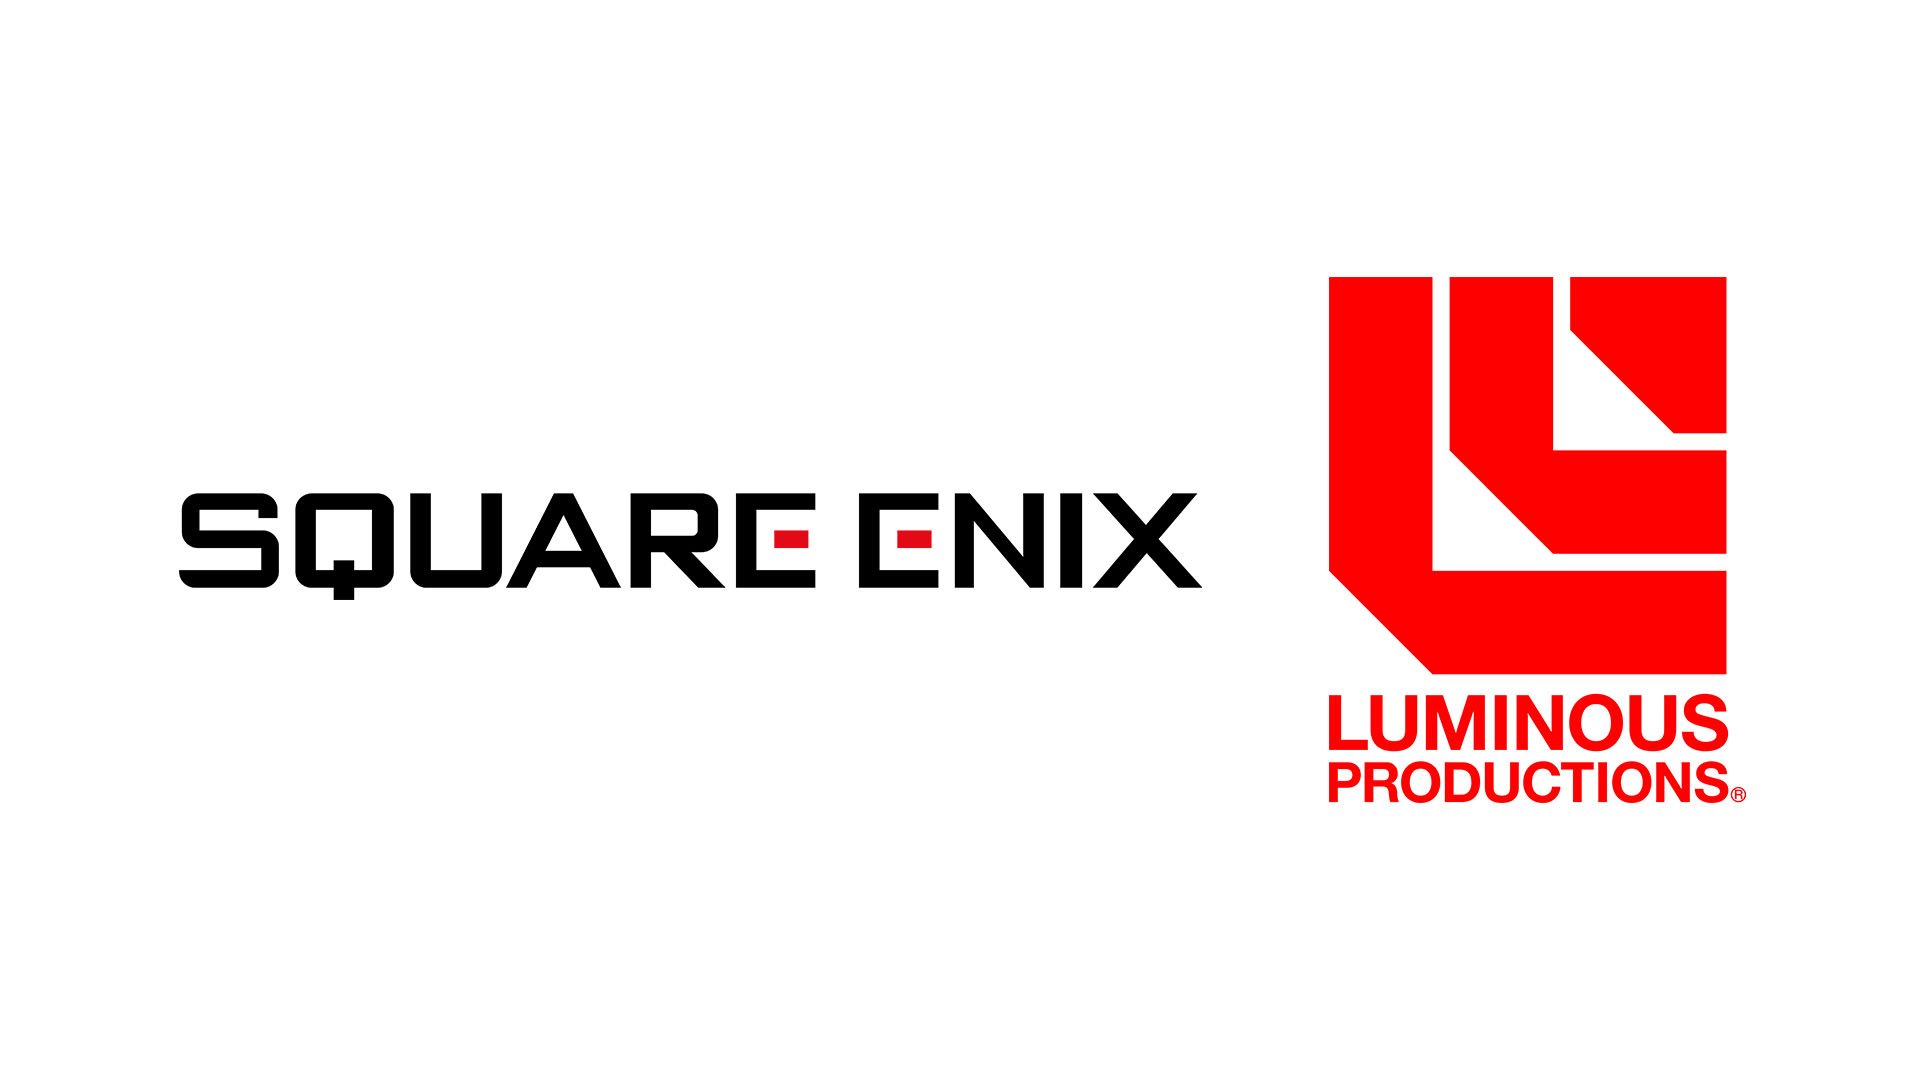 #
      Square Enix to merge with Luminous Productions on May 1